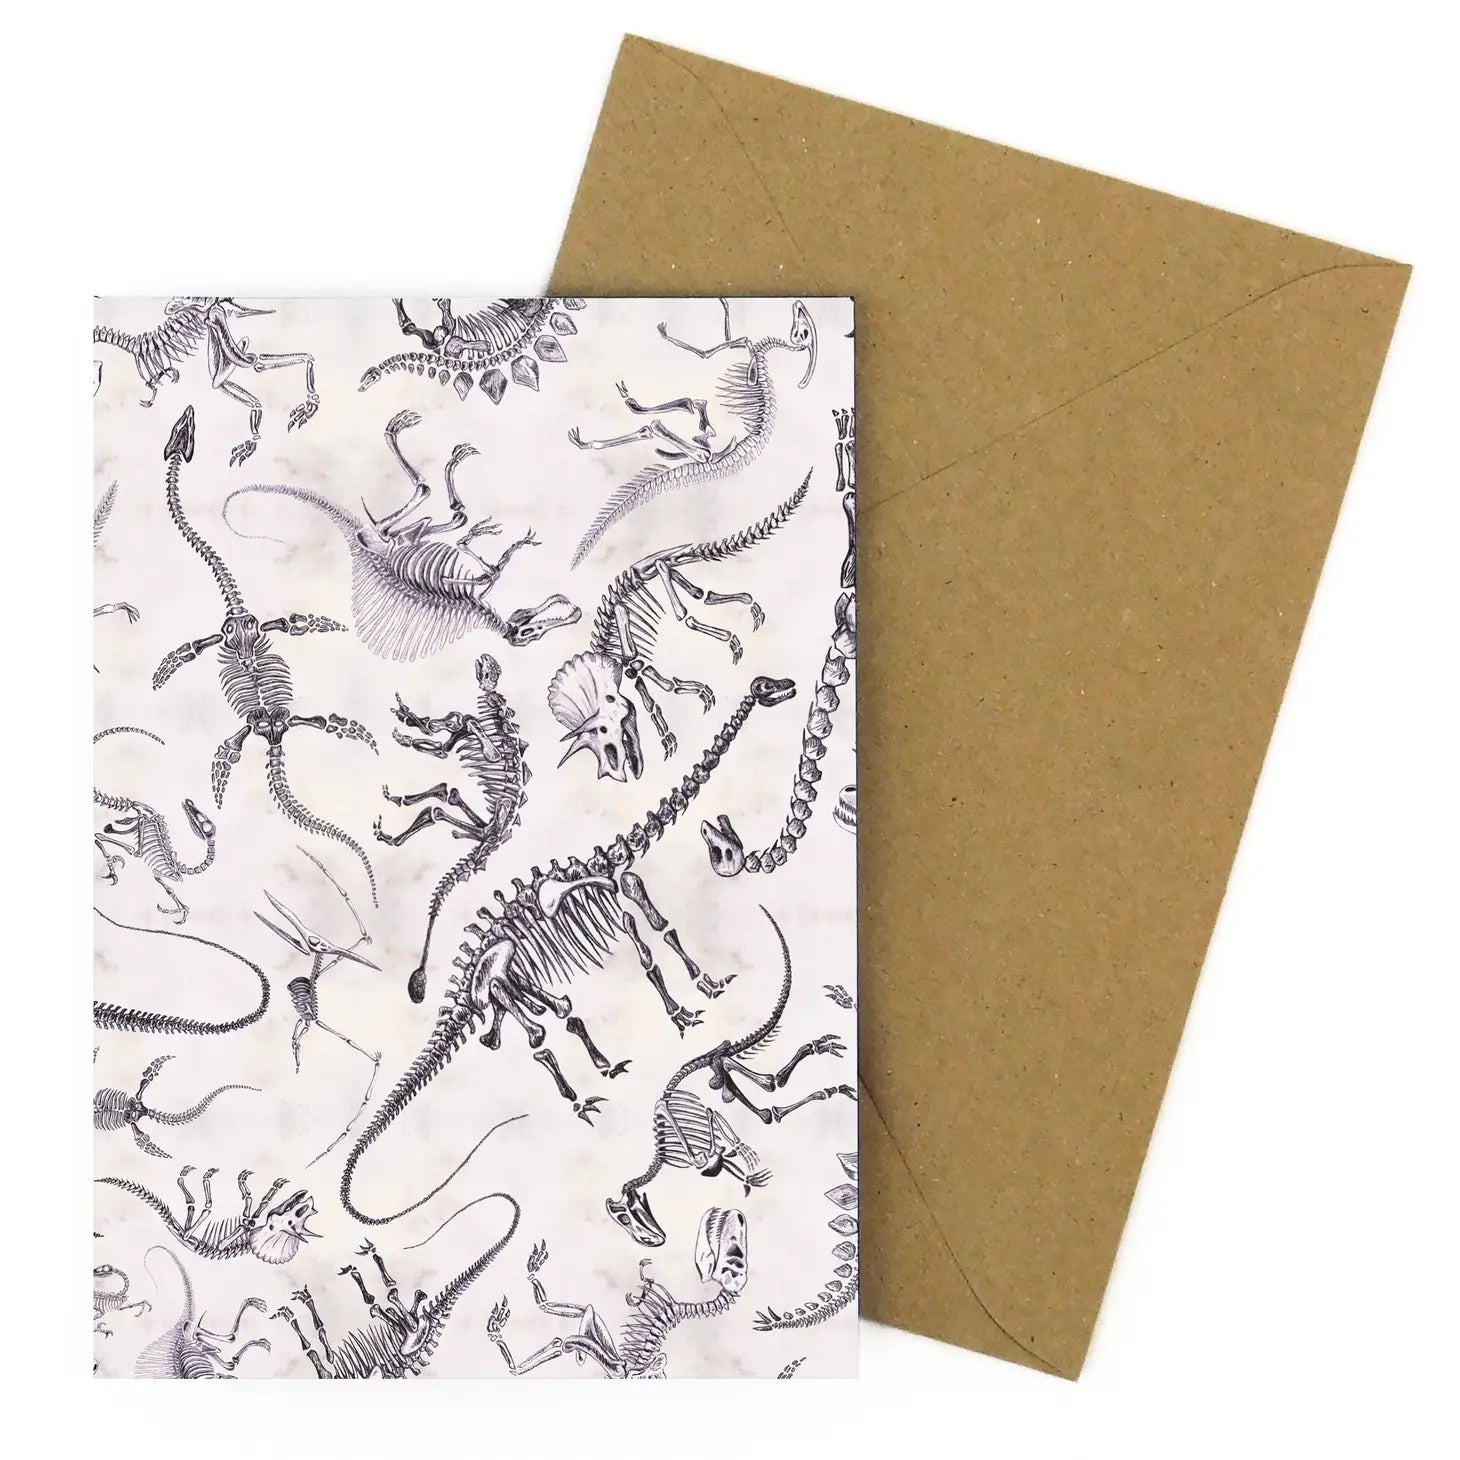 Mesozoic Dinosaur Print | Greeting Card | Also the Bison |